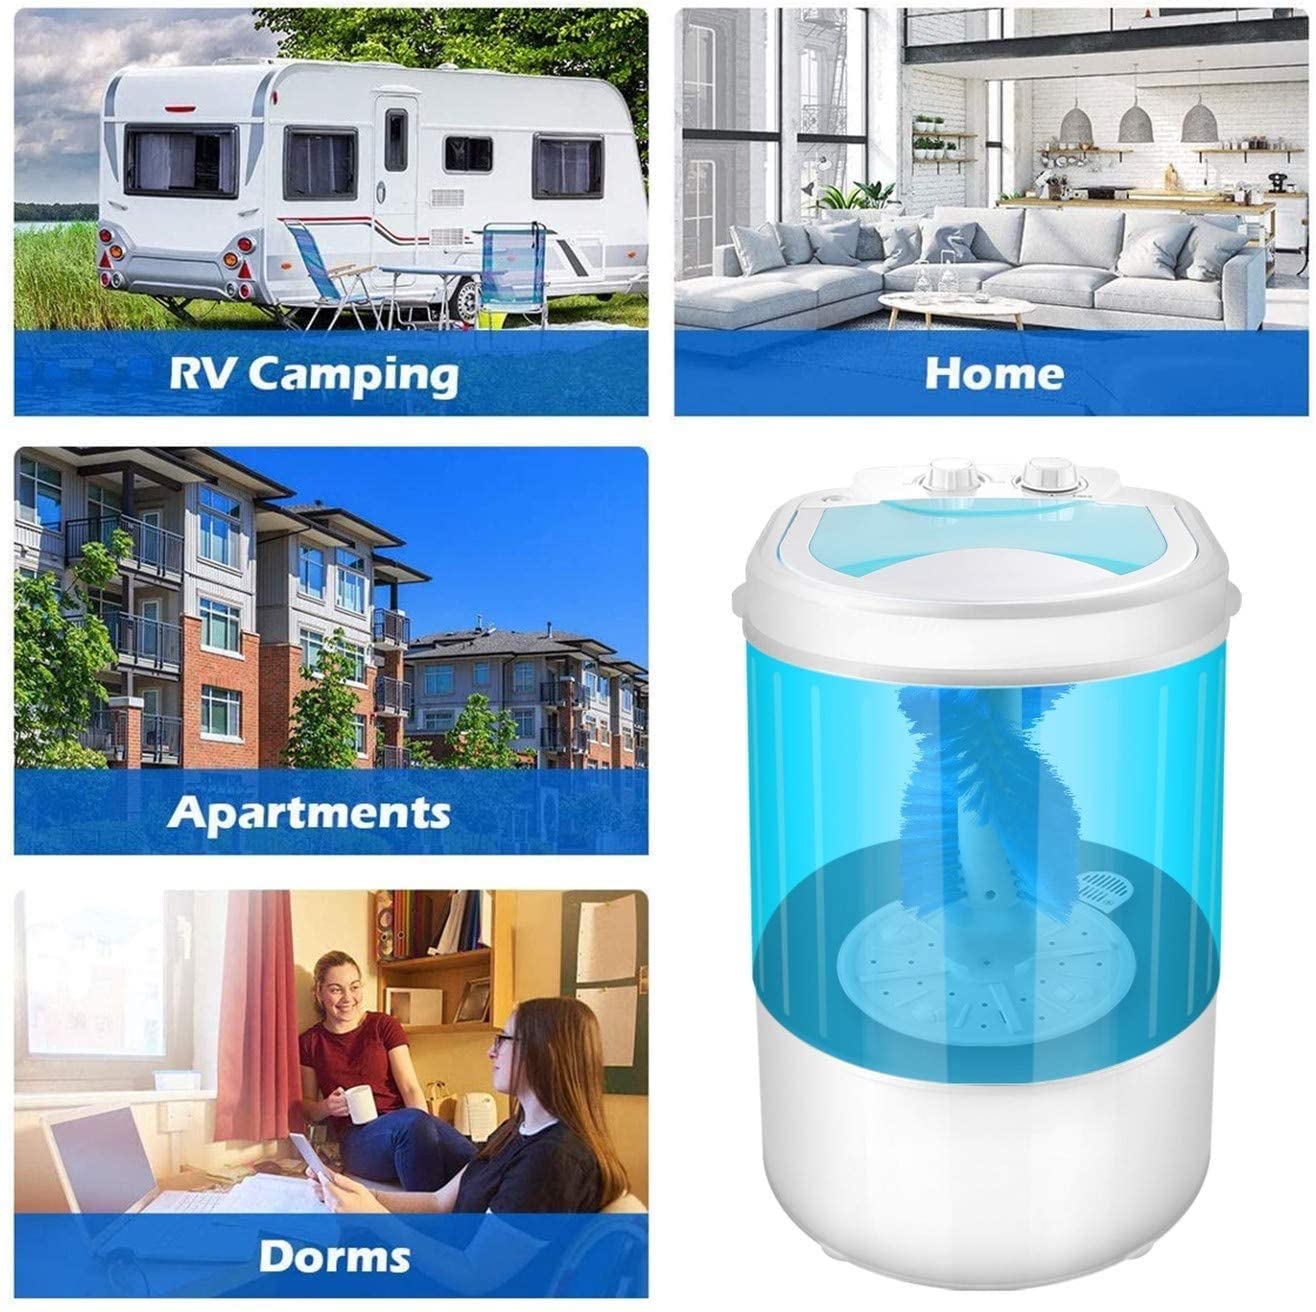 MISMORI Portable Shoes Washing Machine, Mini Portable Washing Machine, Smart Lazy Automatic Shoes Washer, for Apartments Camping Dorms Business Trip College Rooms